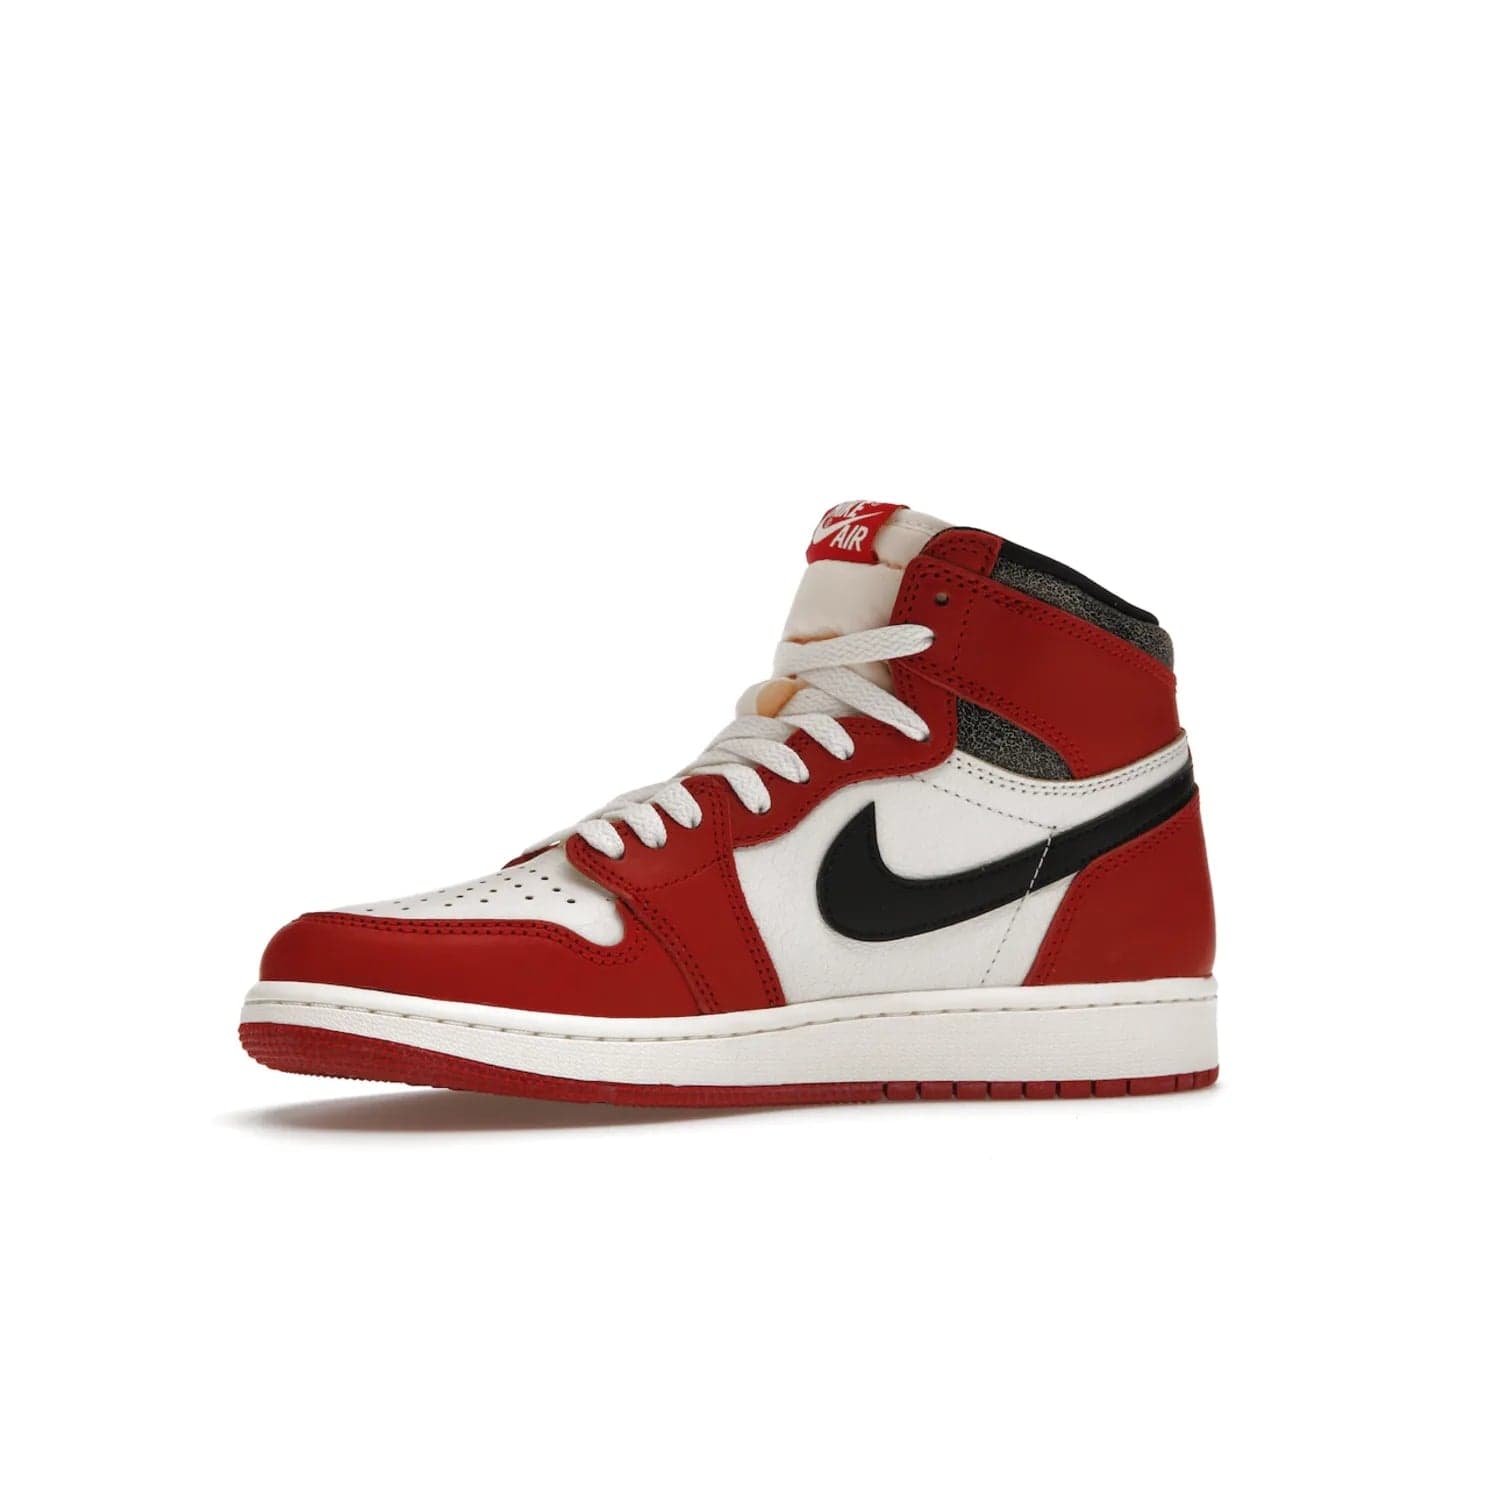 Jordan 1 Retro High OG Chicago Lost and Found (GS) - Image 17 - Only at www.BallersClubKickz.com - Grab the Air Jordan 1 Retro High OG Chicago Reimagined GS, presenting in classic 1985 silhouette. Varsity Red, Black, Muslin and Sail hues, featuring Nike Air branding, Wings on the collars and printed insoles. Don't miss out when it releases 19th Nov 2022.